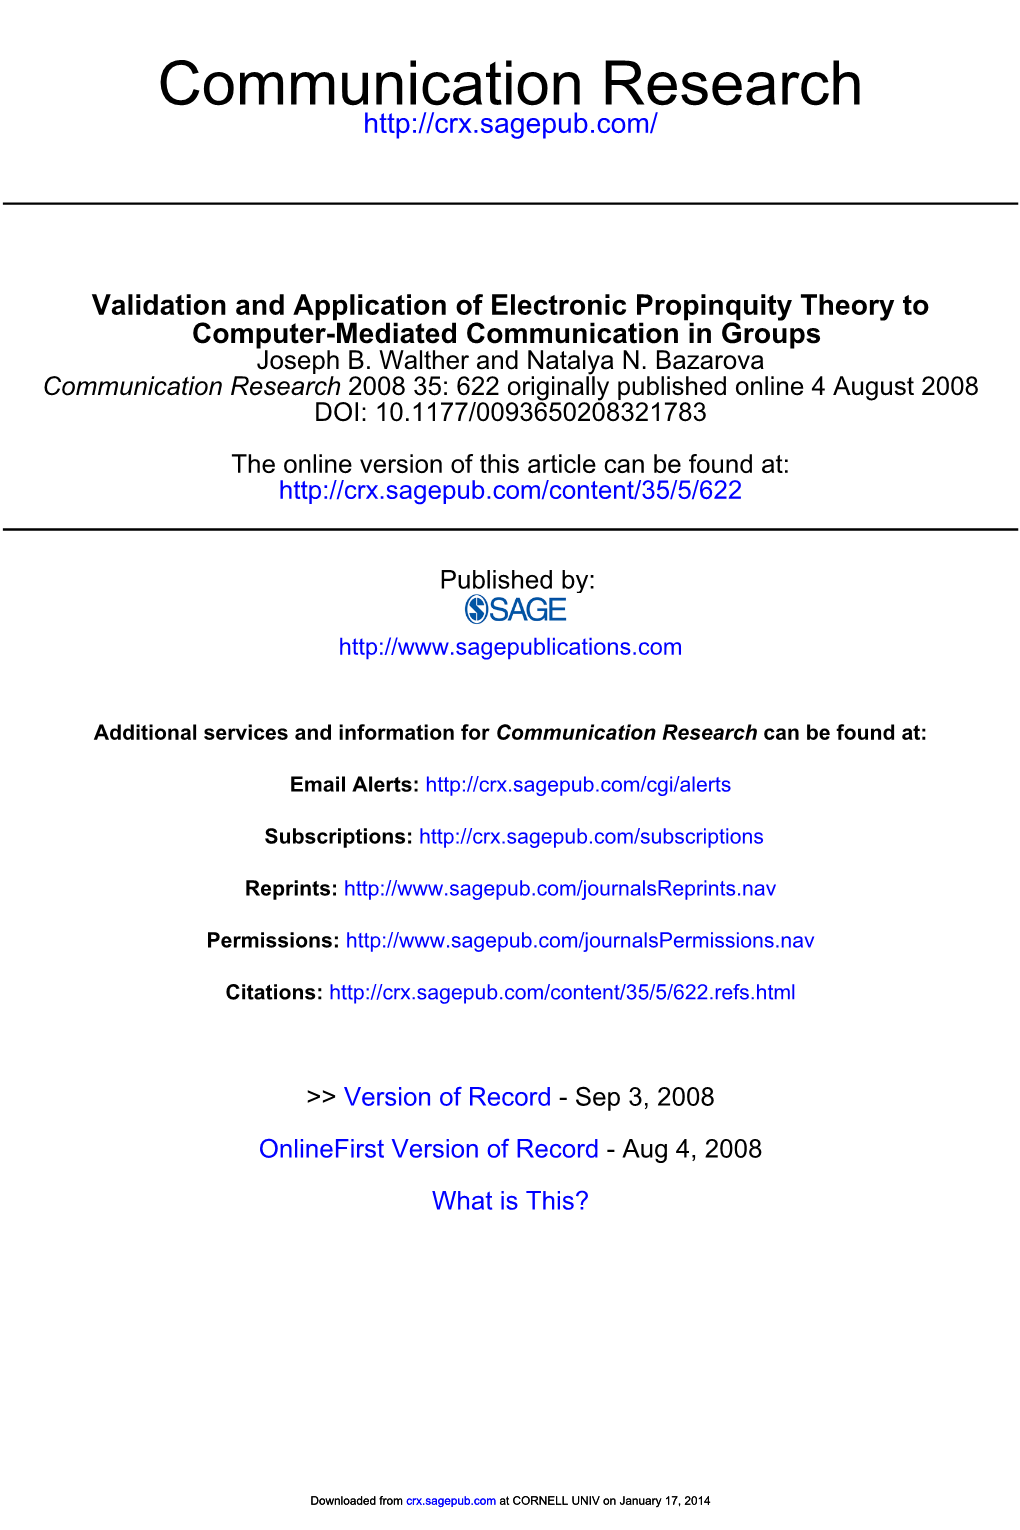 Validation and Application of Electronic Propinquity Theory to Computer-Mediated Communication in Groups Joseph B